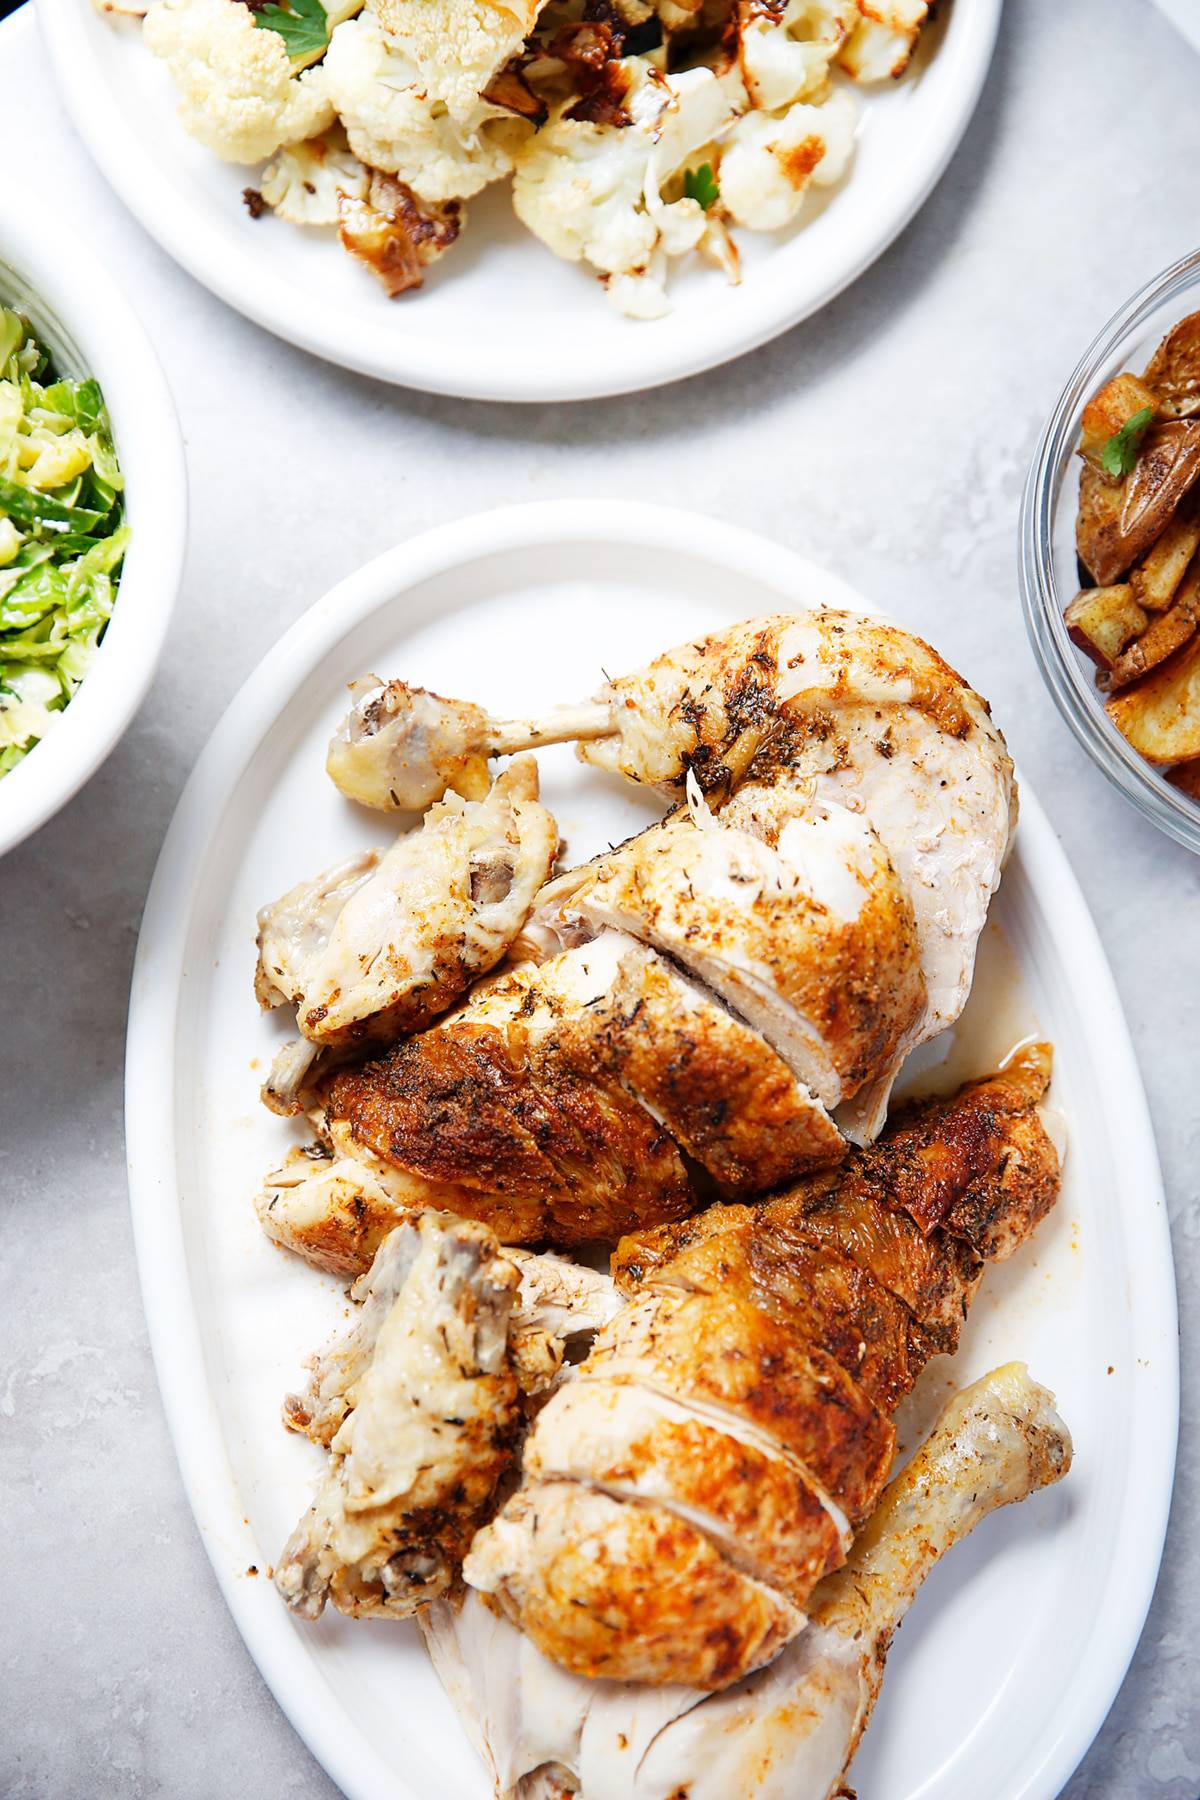 How do I cook a whole chicken in pressure cooker